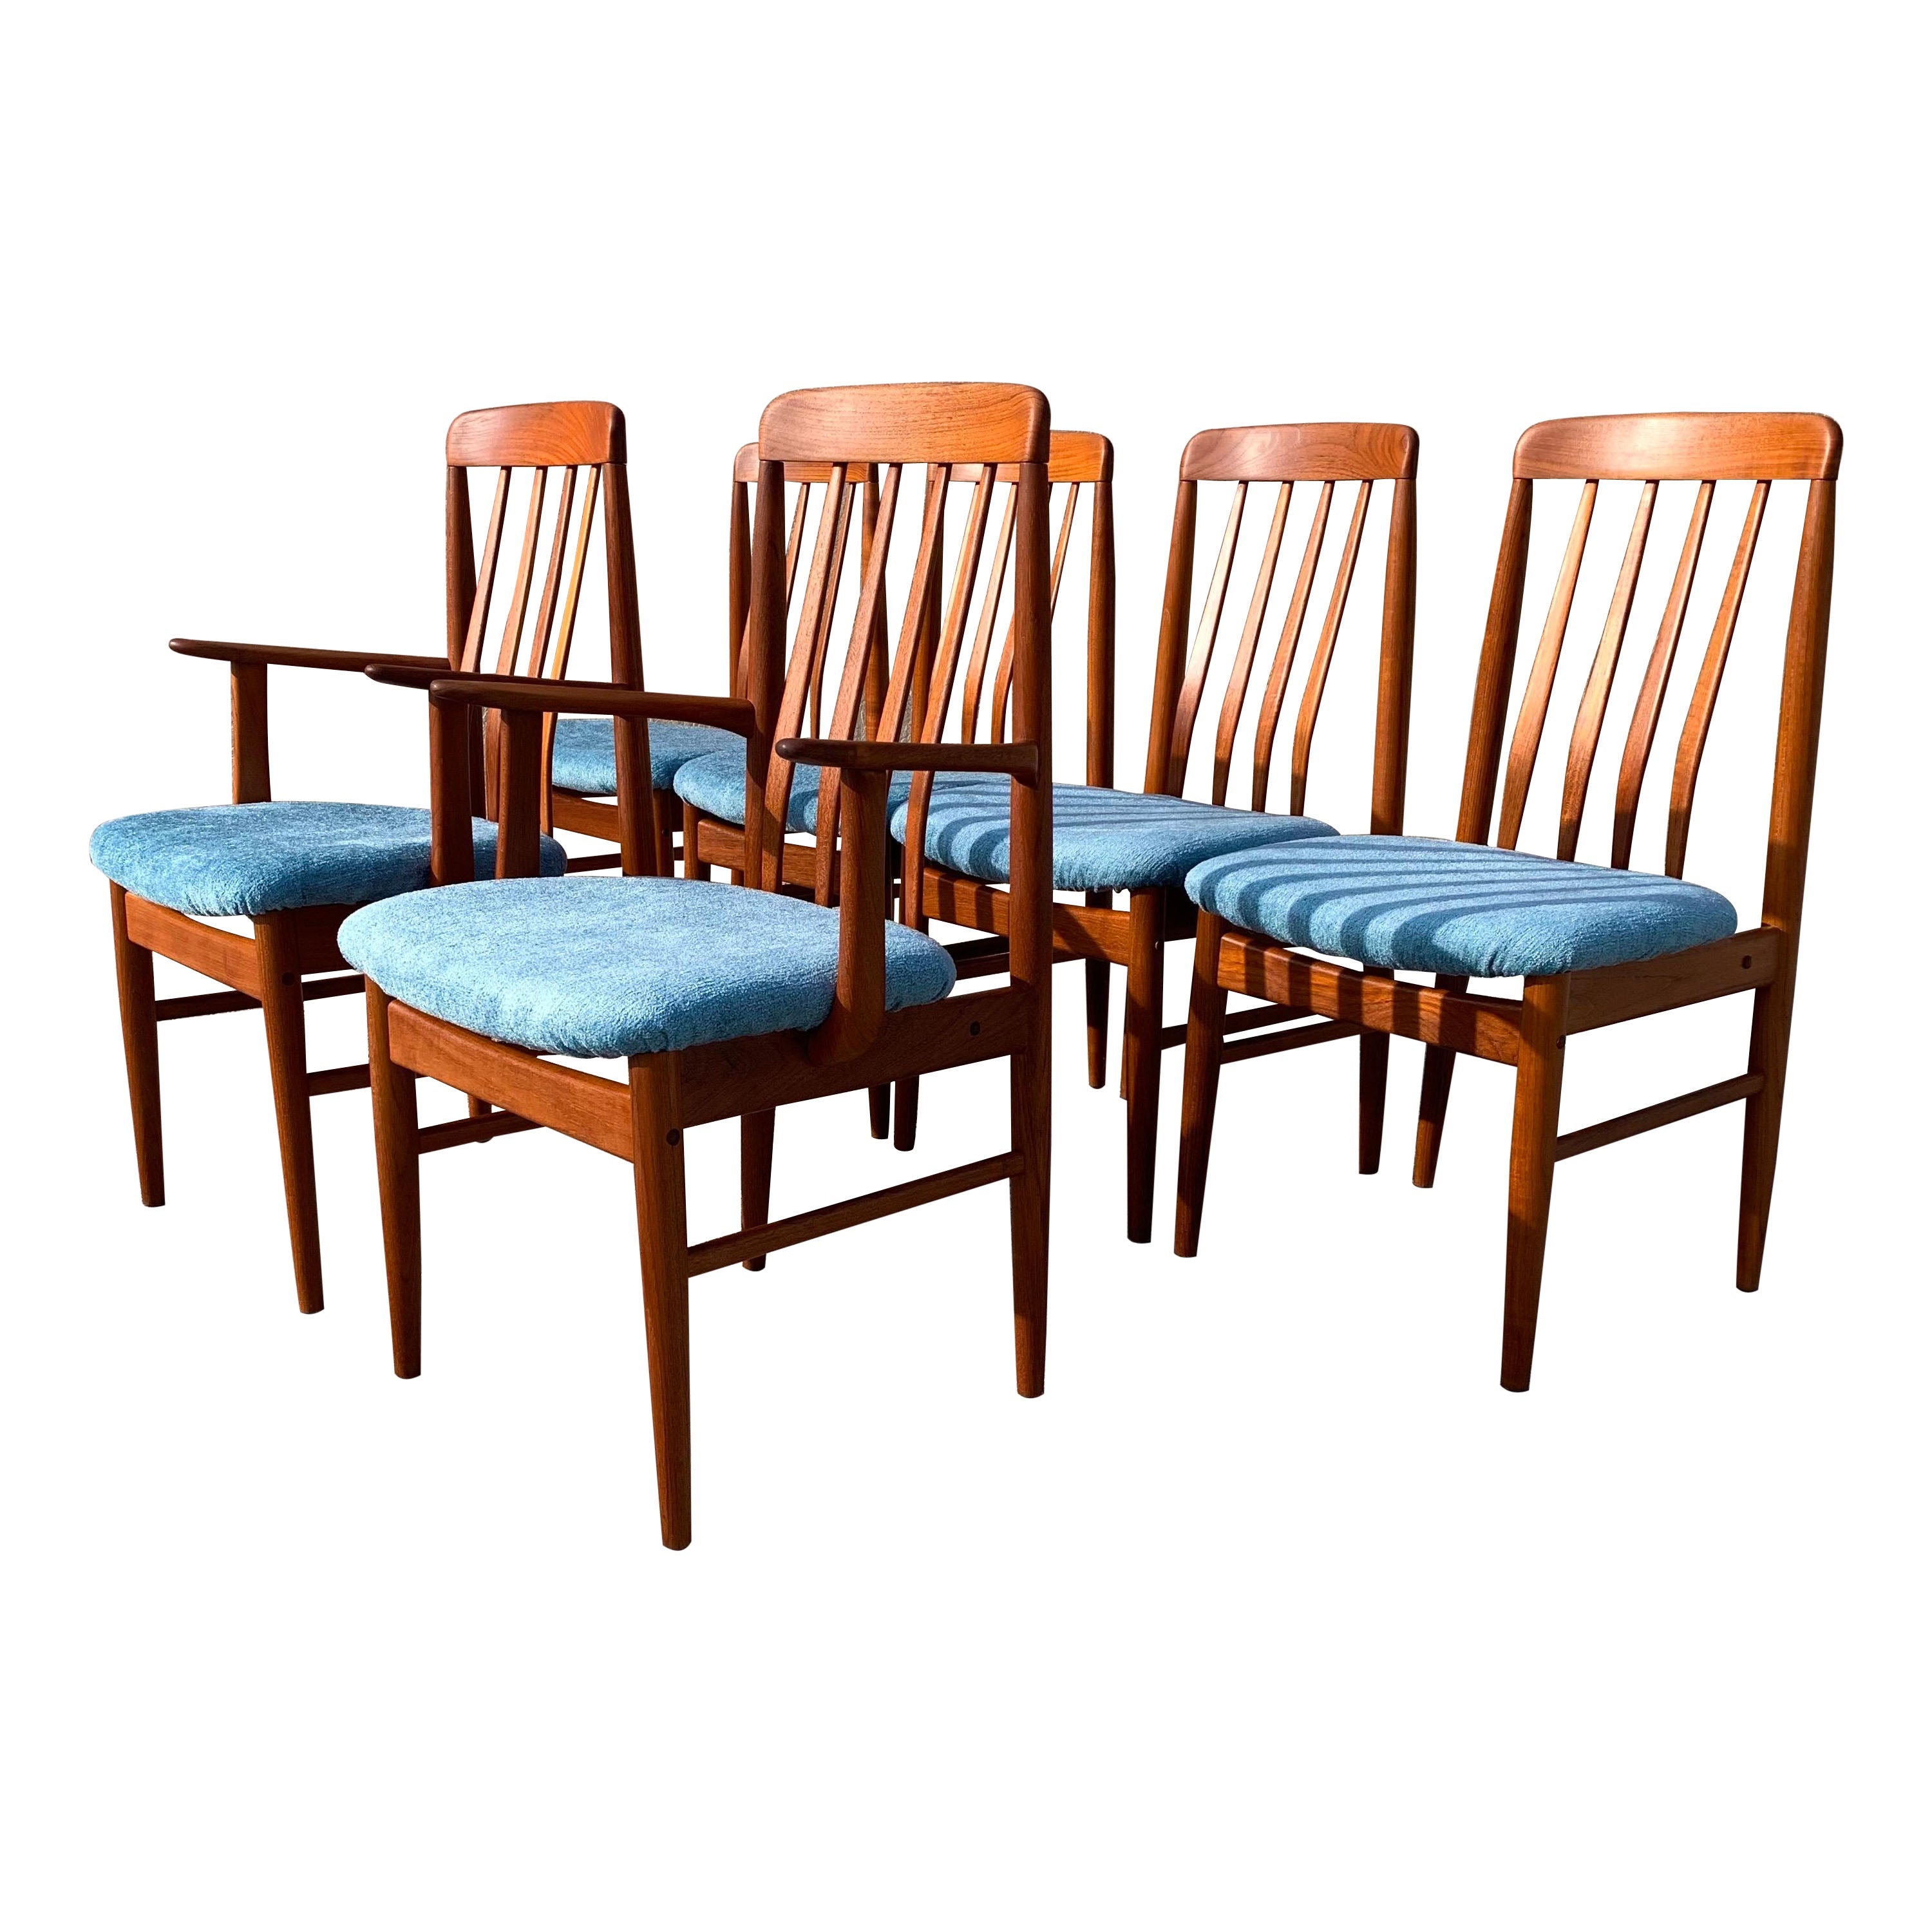 1970s Benny Linden Teak Dining Chairs, Set of 6